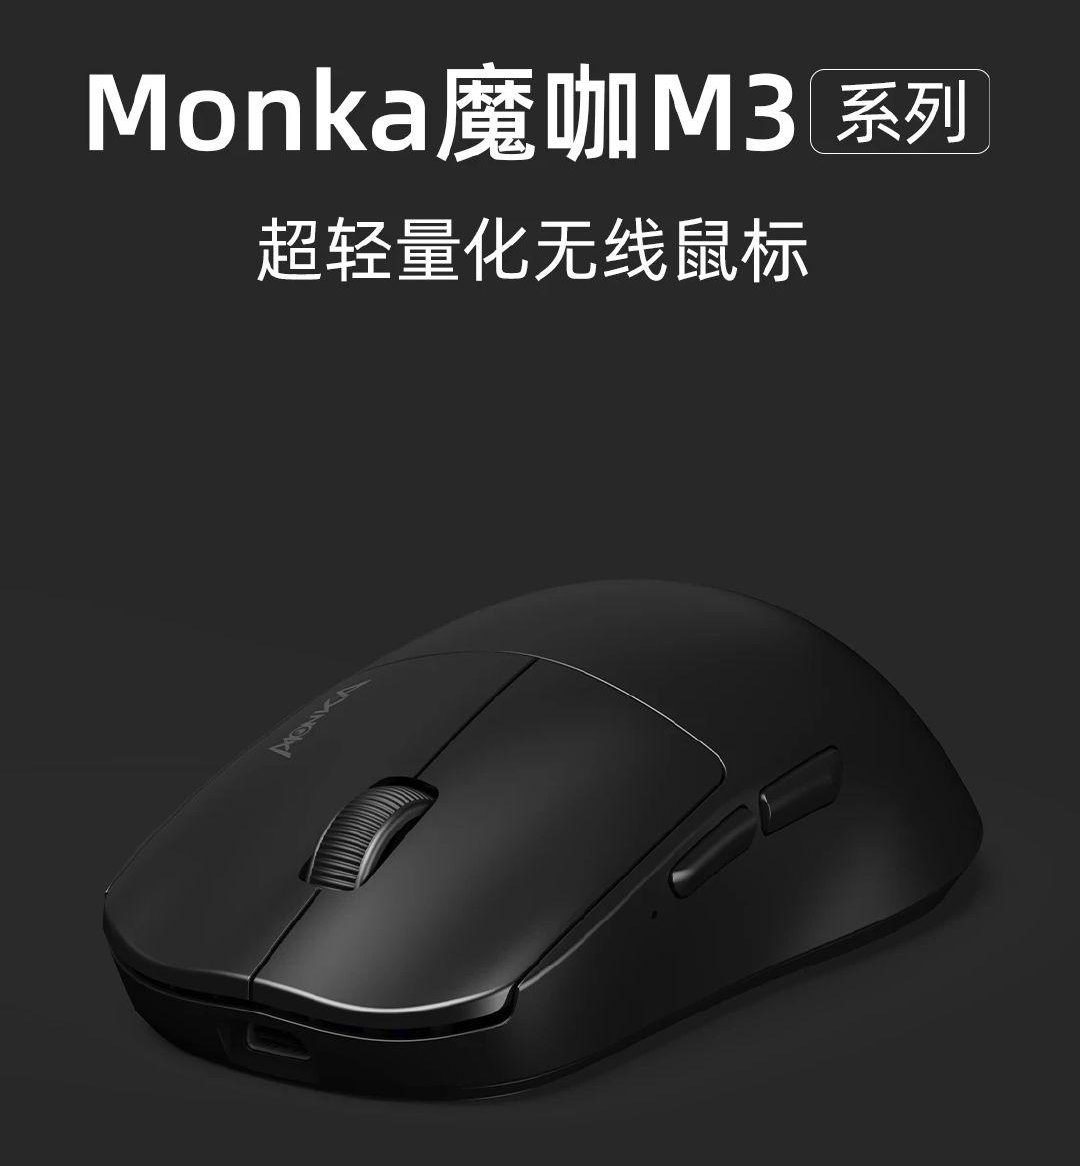 Monka first mouse coming soon!
3395 and 55g .
#mouse #newarrival #gamingmouse #mechkeys